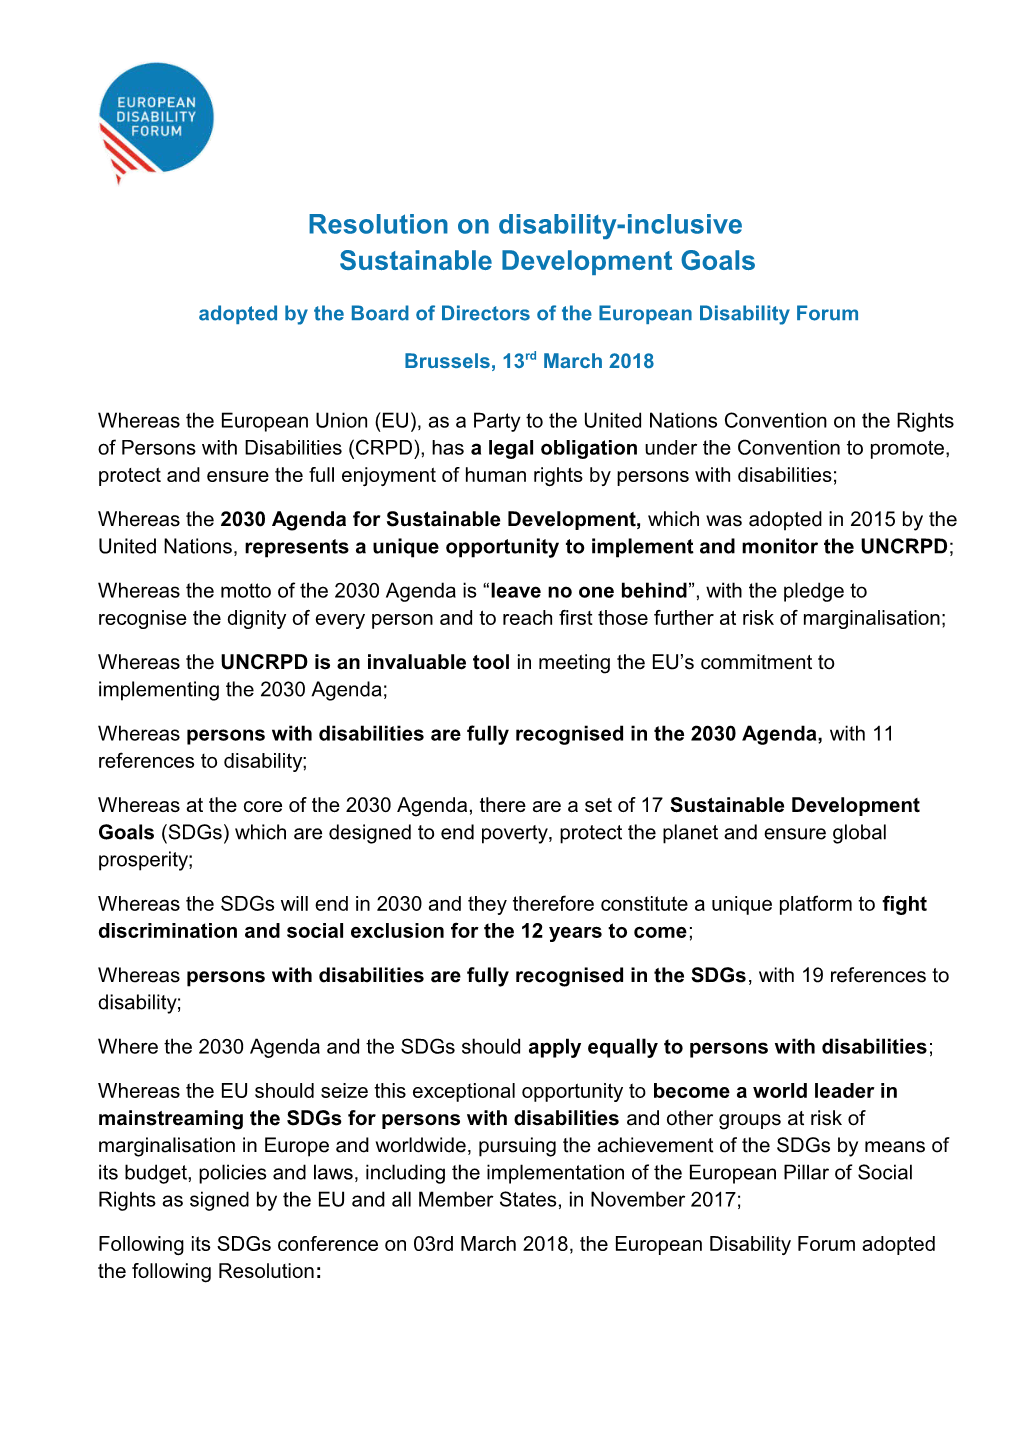 Resolution on Disability-Inclusive Sustainable Development Goals